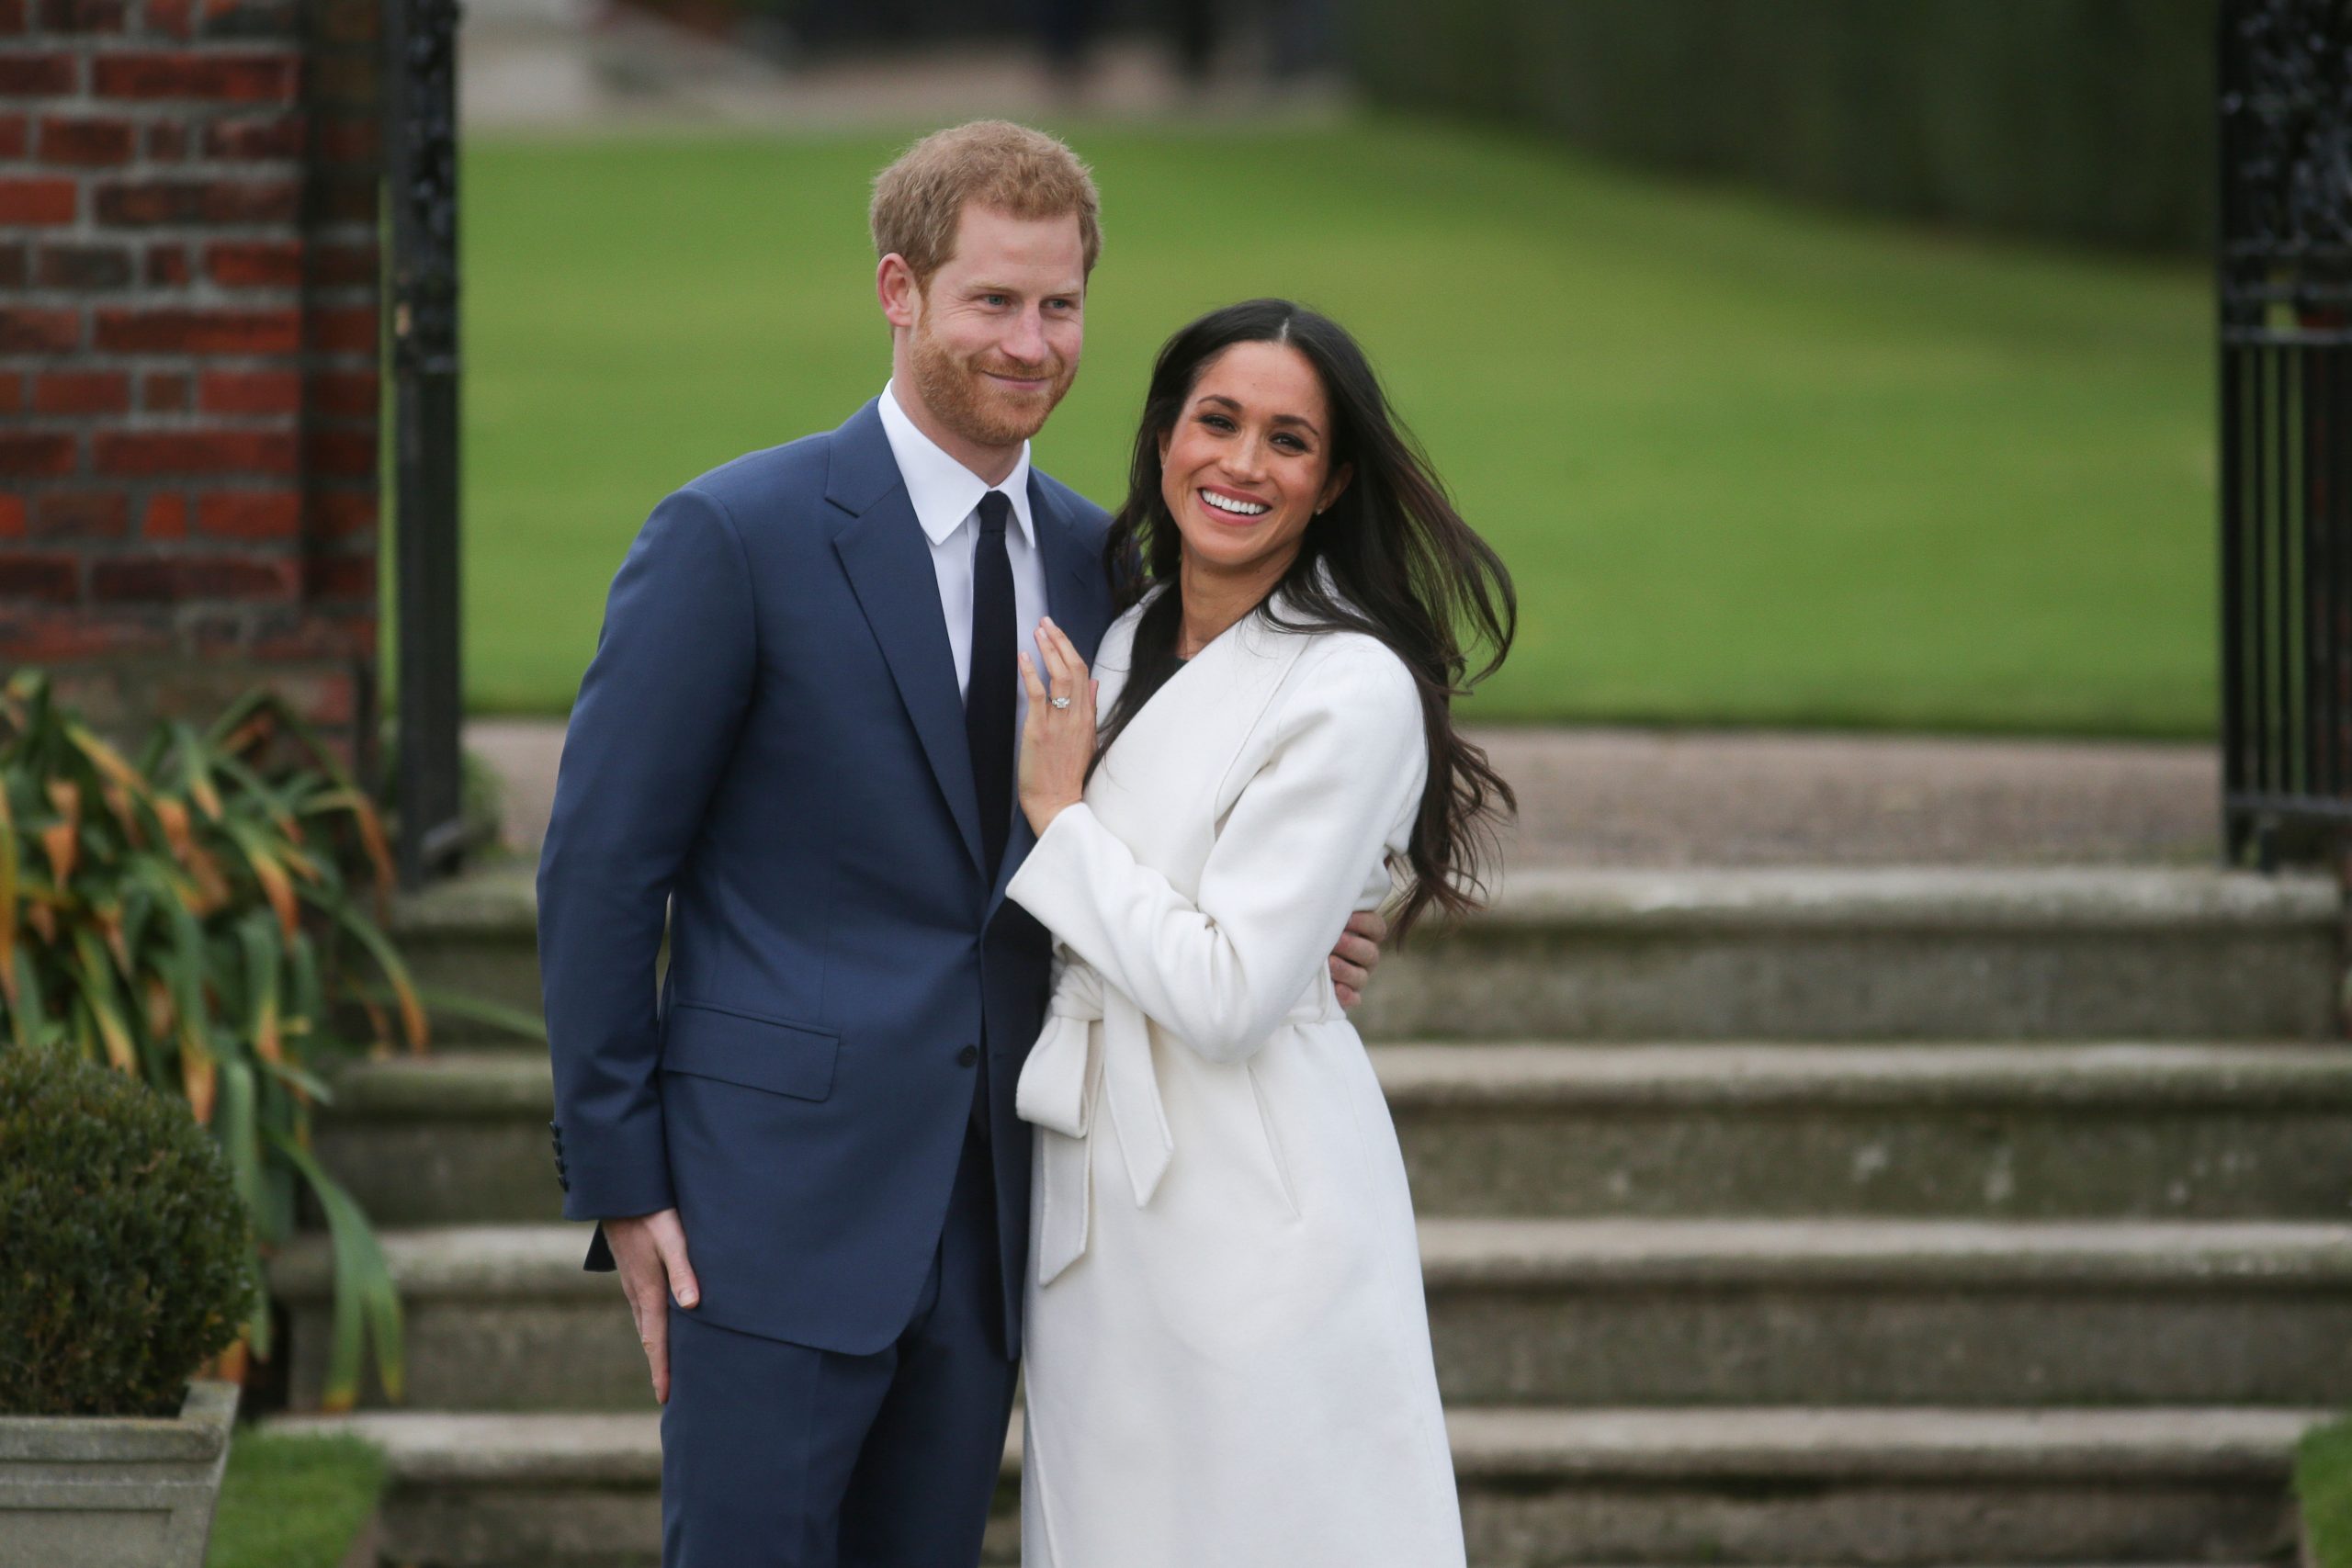 Harry, Meghan Markle sign deal with Spotify to produce podcast